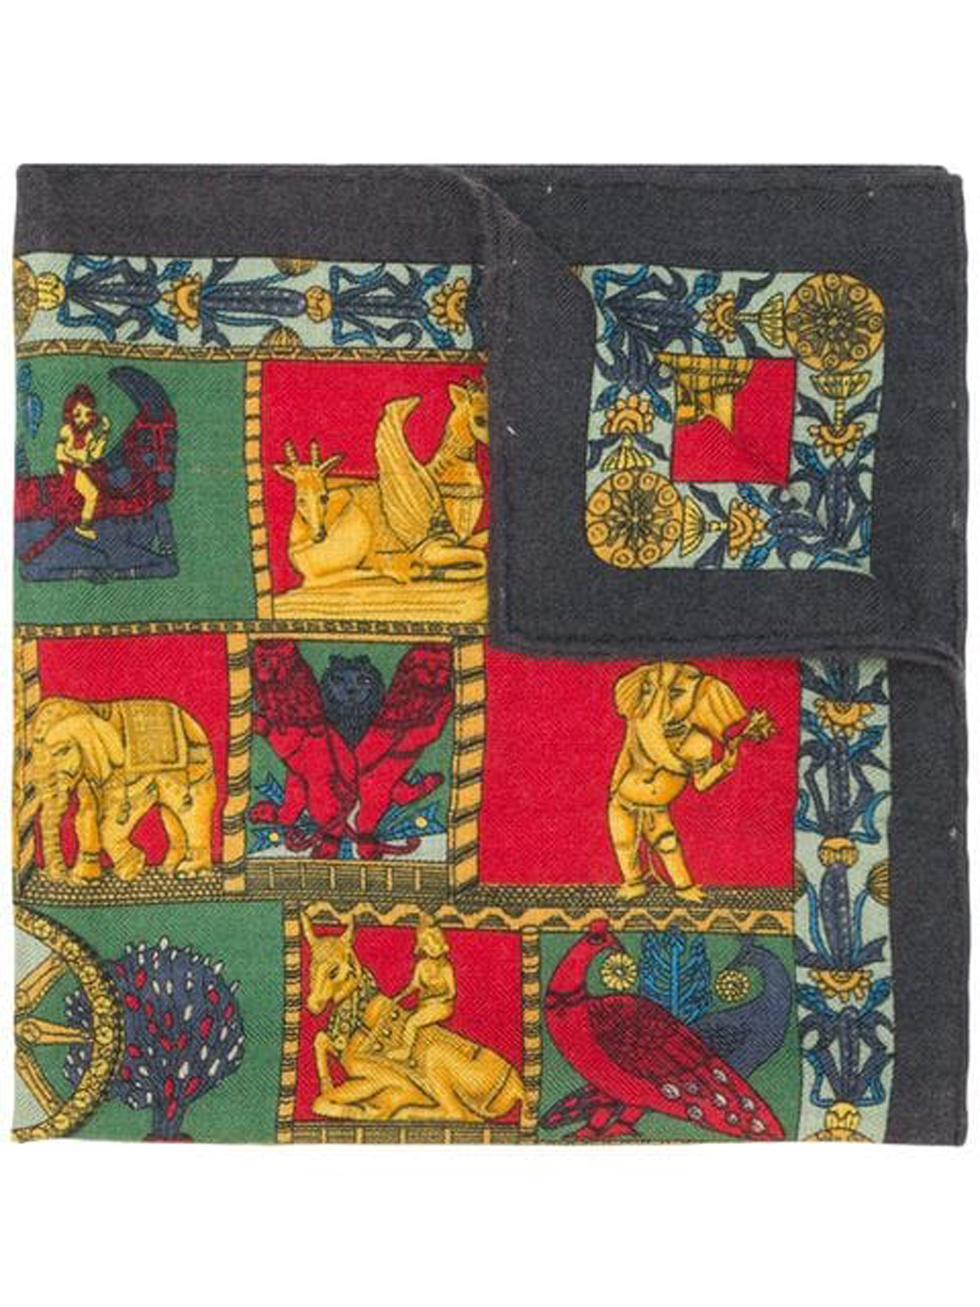  Hermes small multico cashmere scarf  featuring mythic animals.
In excellent vintage condition. Made in France.
16,54in. (42cm) X 16,54in. (42cm)
We guarantee you will receive this  iconic item as described and showed on photos.
(please enlarge